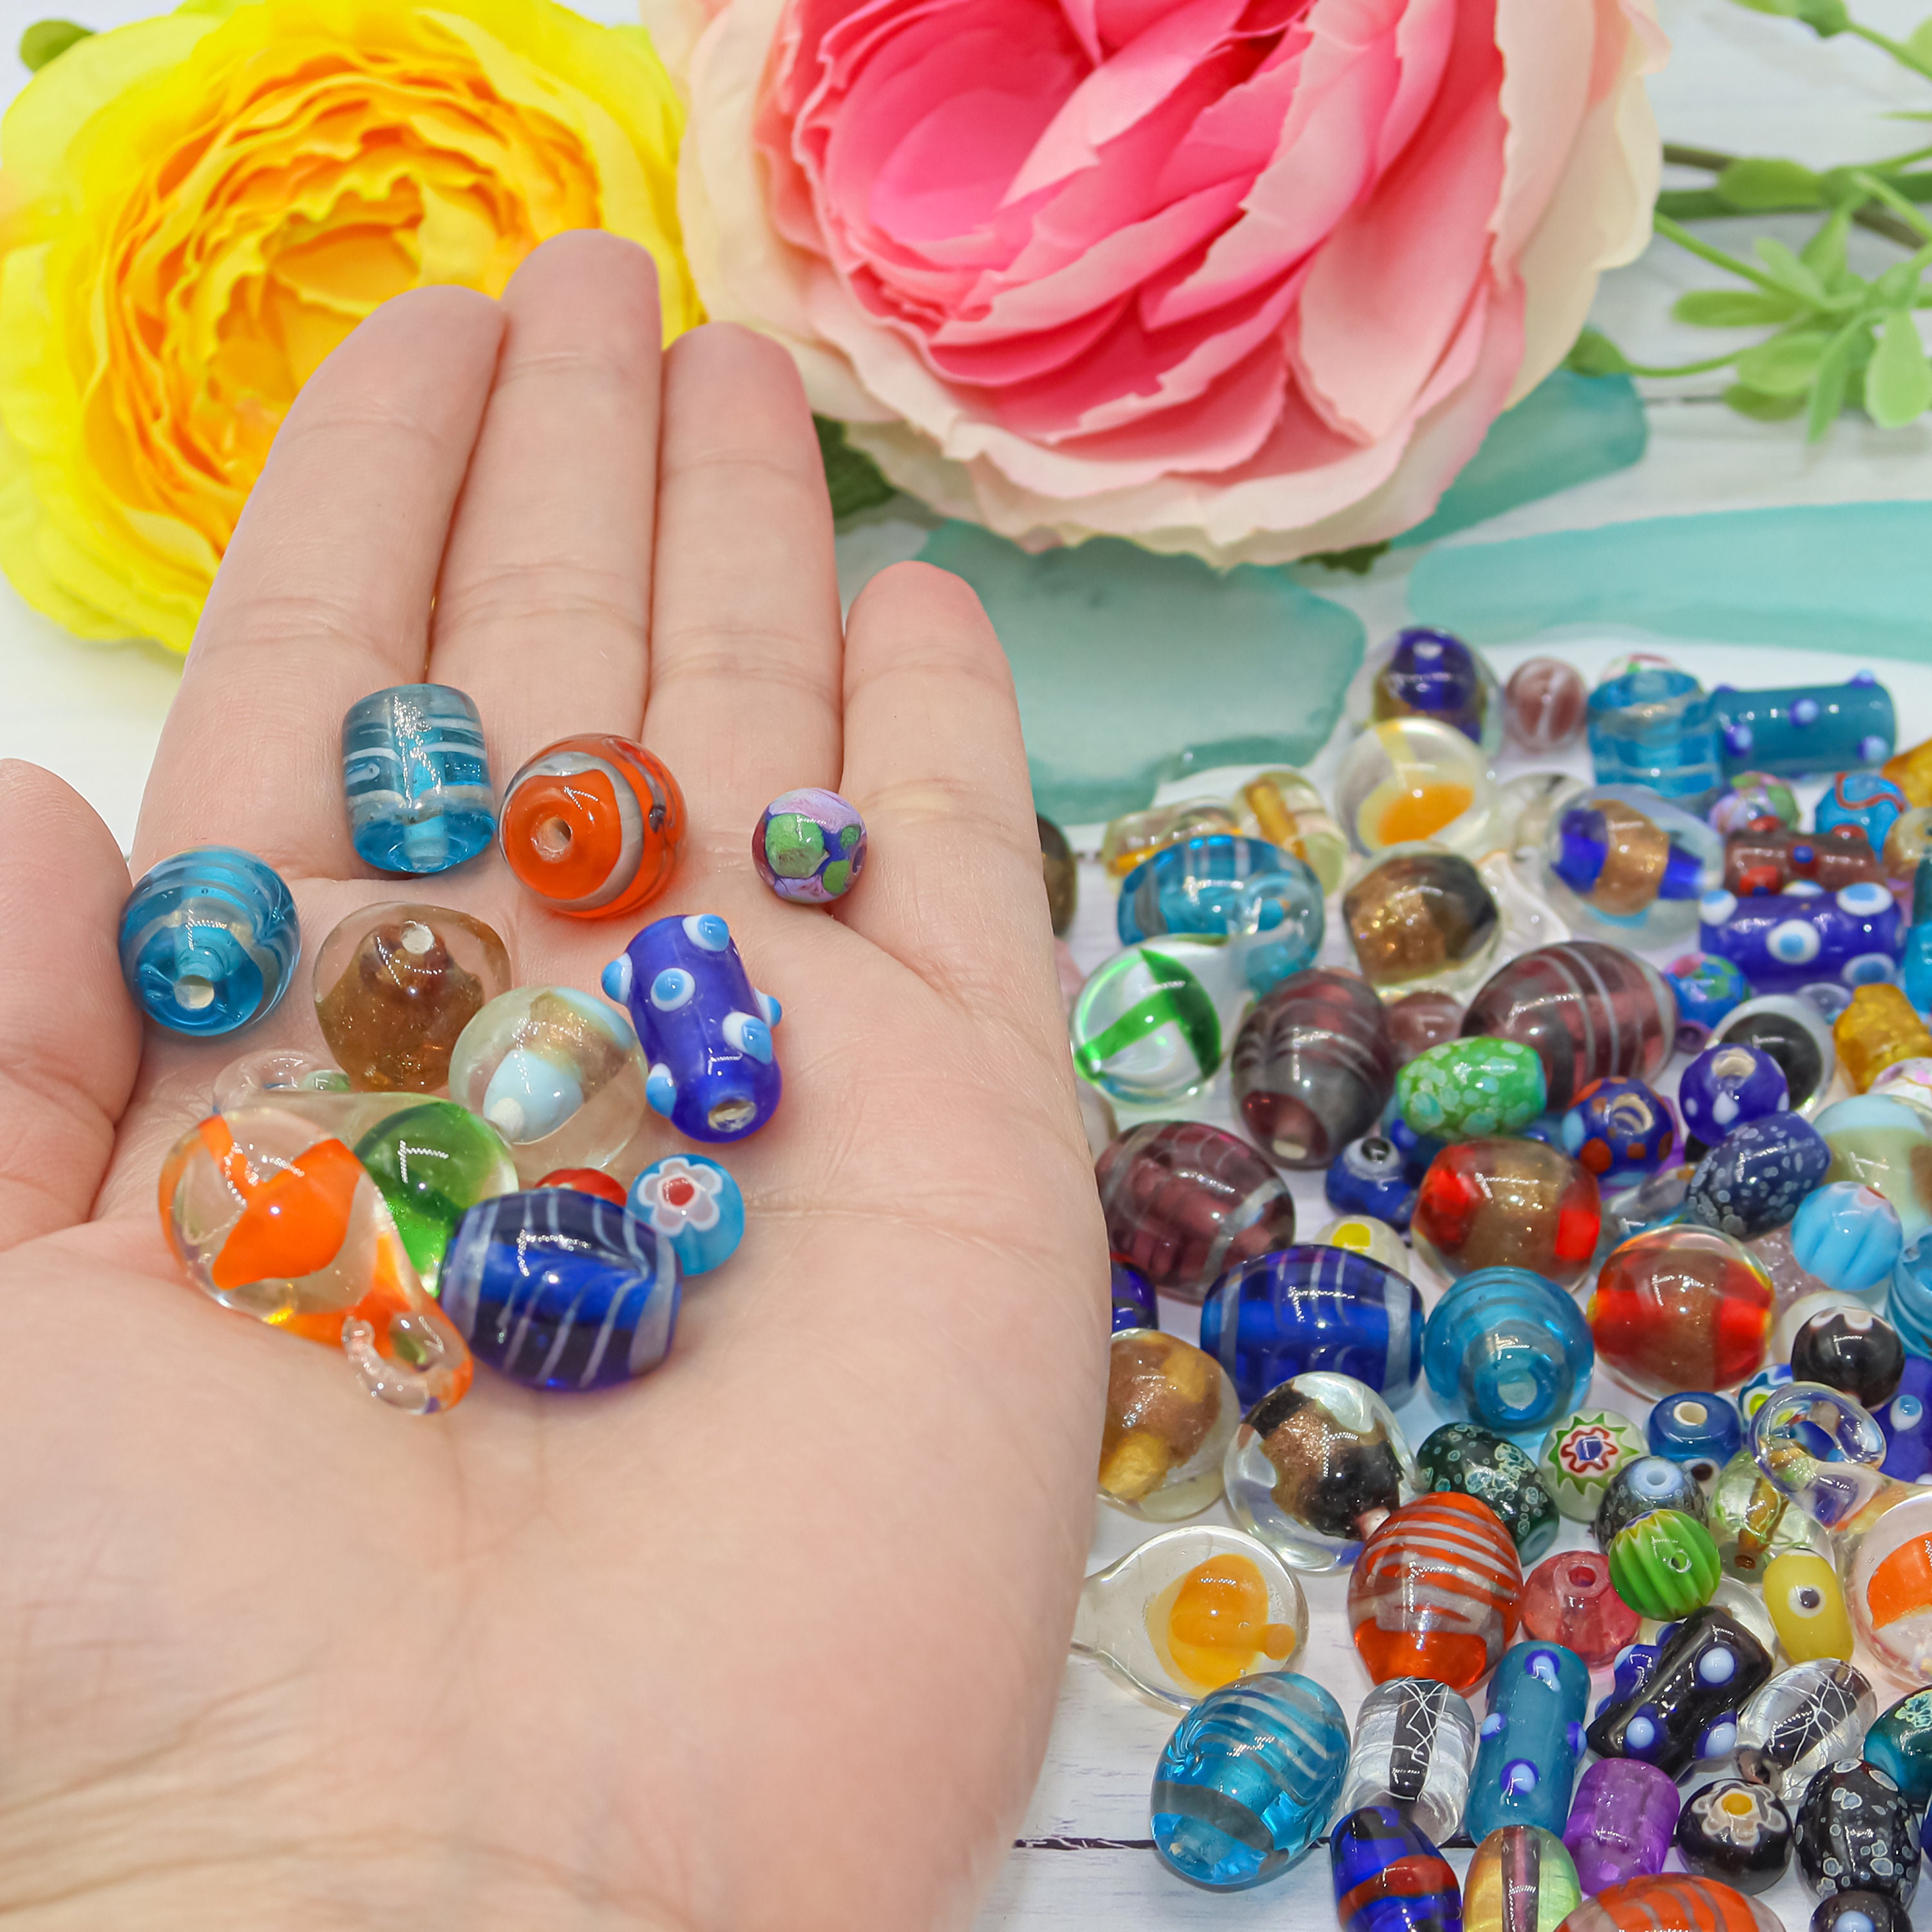 50-60 Random Assorted Lampwork Glass Beads for Jewelry Making - Etsy